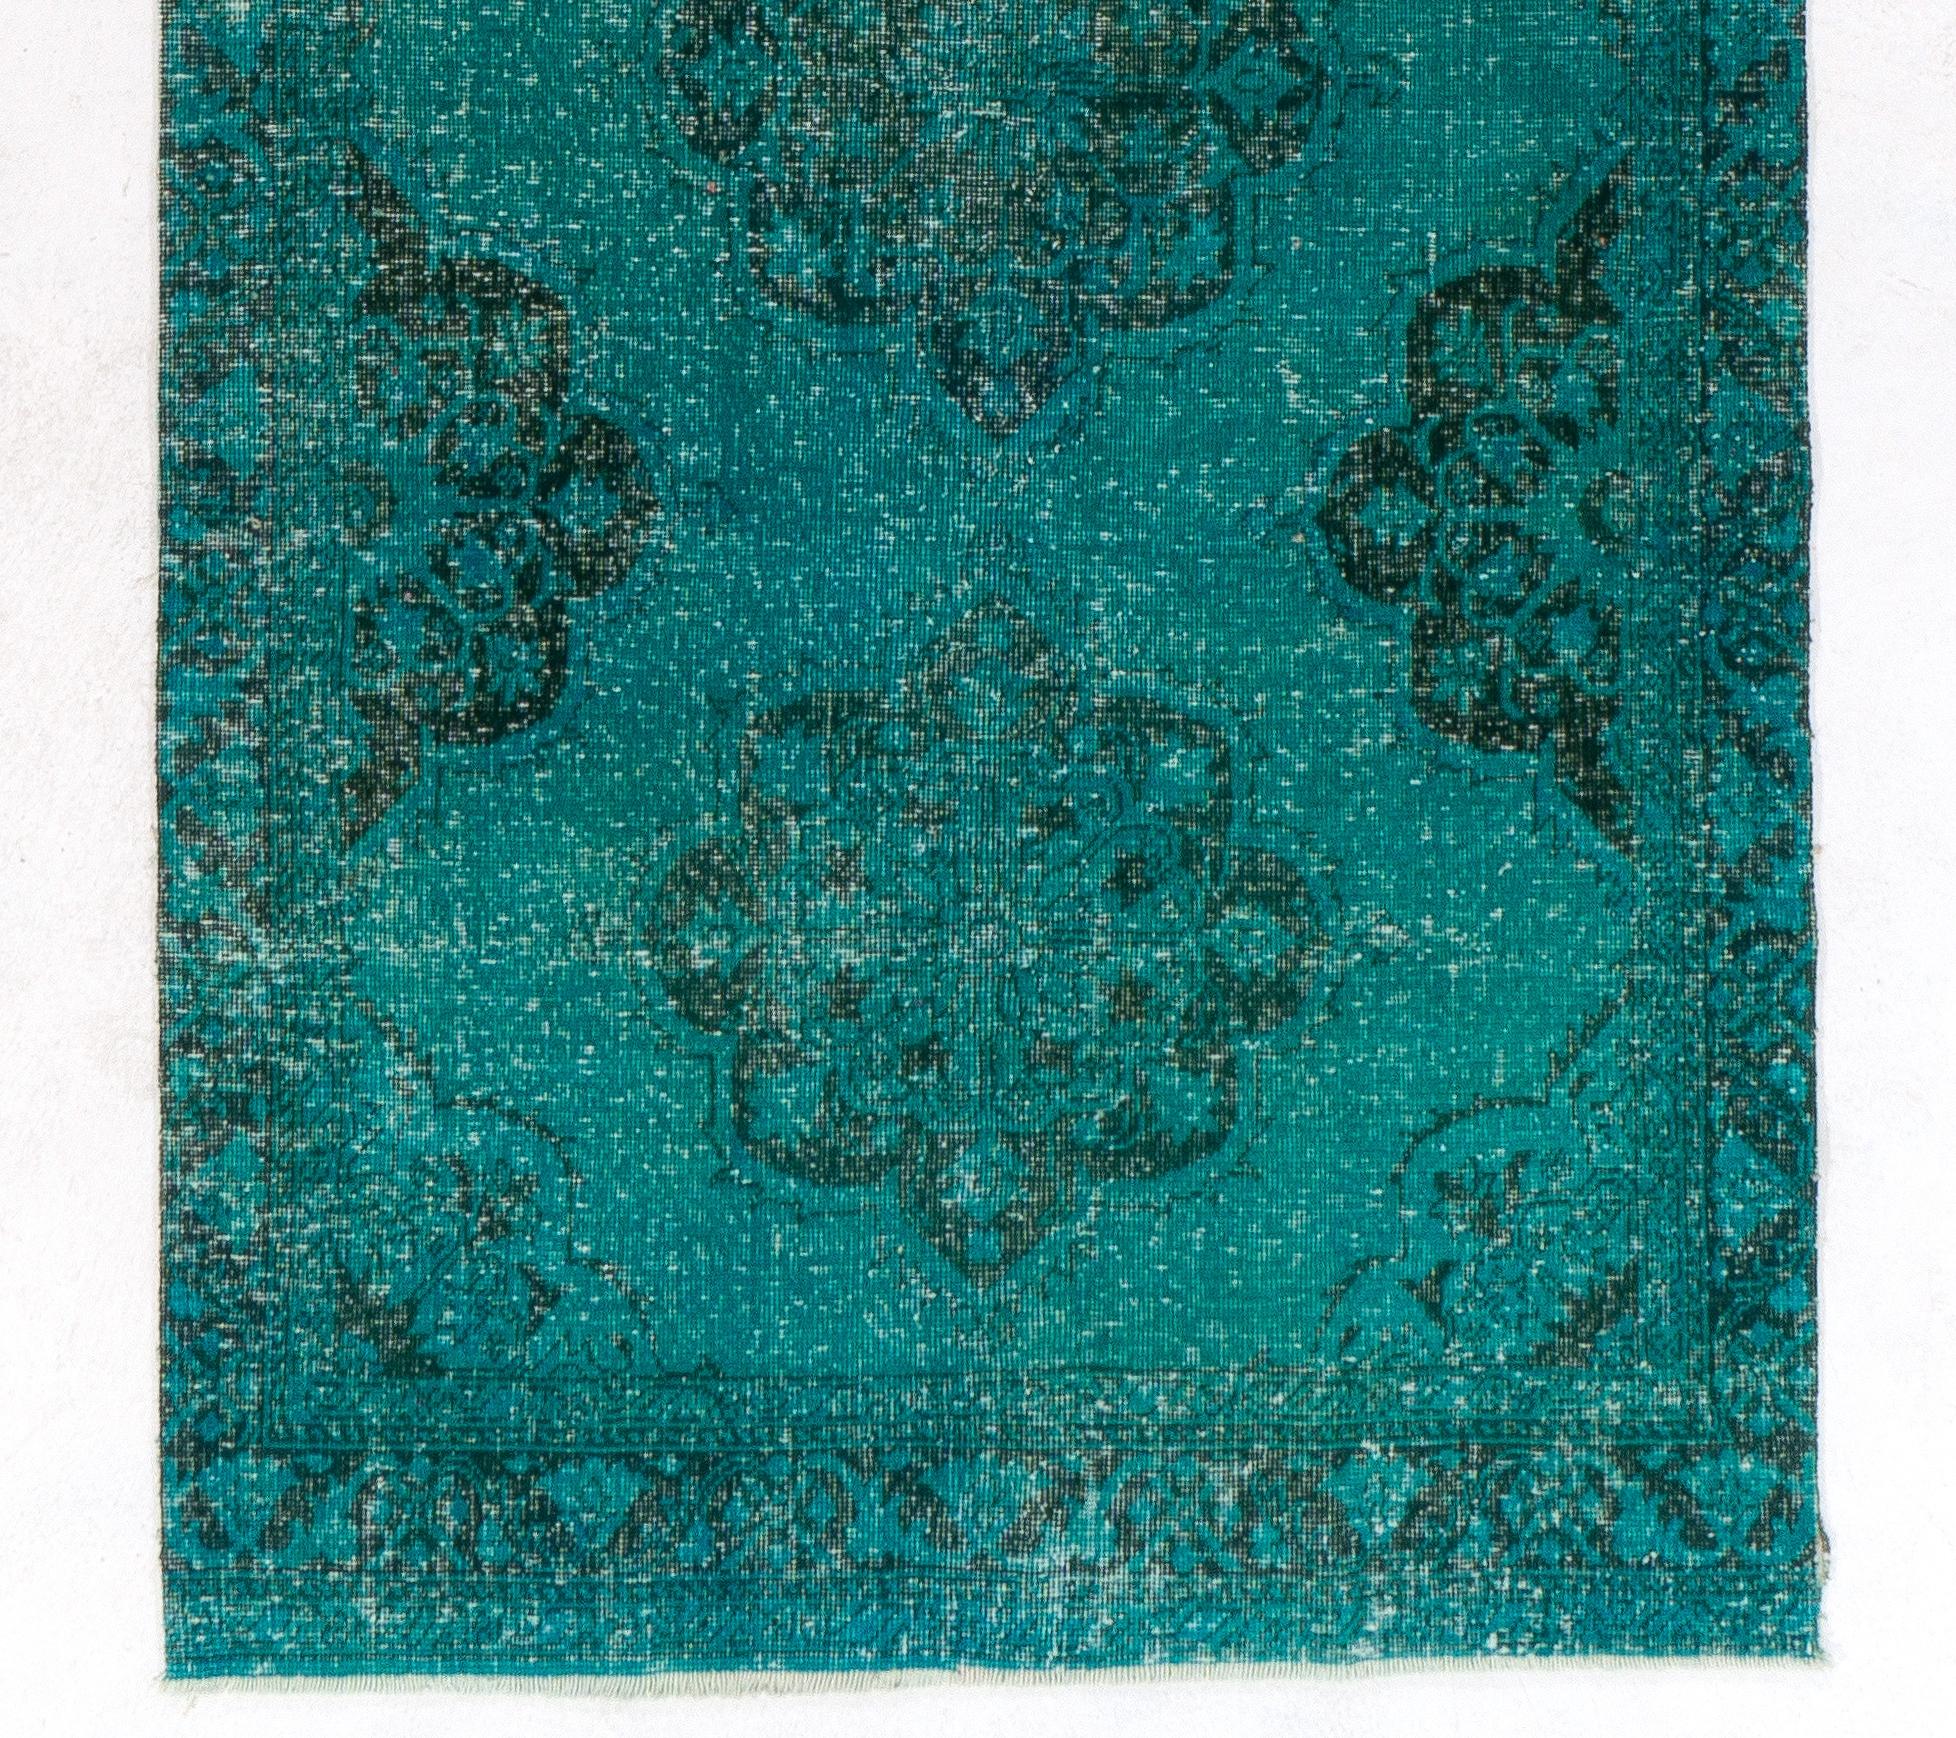 Hand-Knotted 4.6x13 Ft Turkish Hallway Runner Rug in Teal Blue. Contemporary Corridor Carpet For Sale